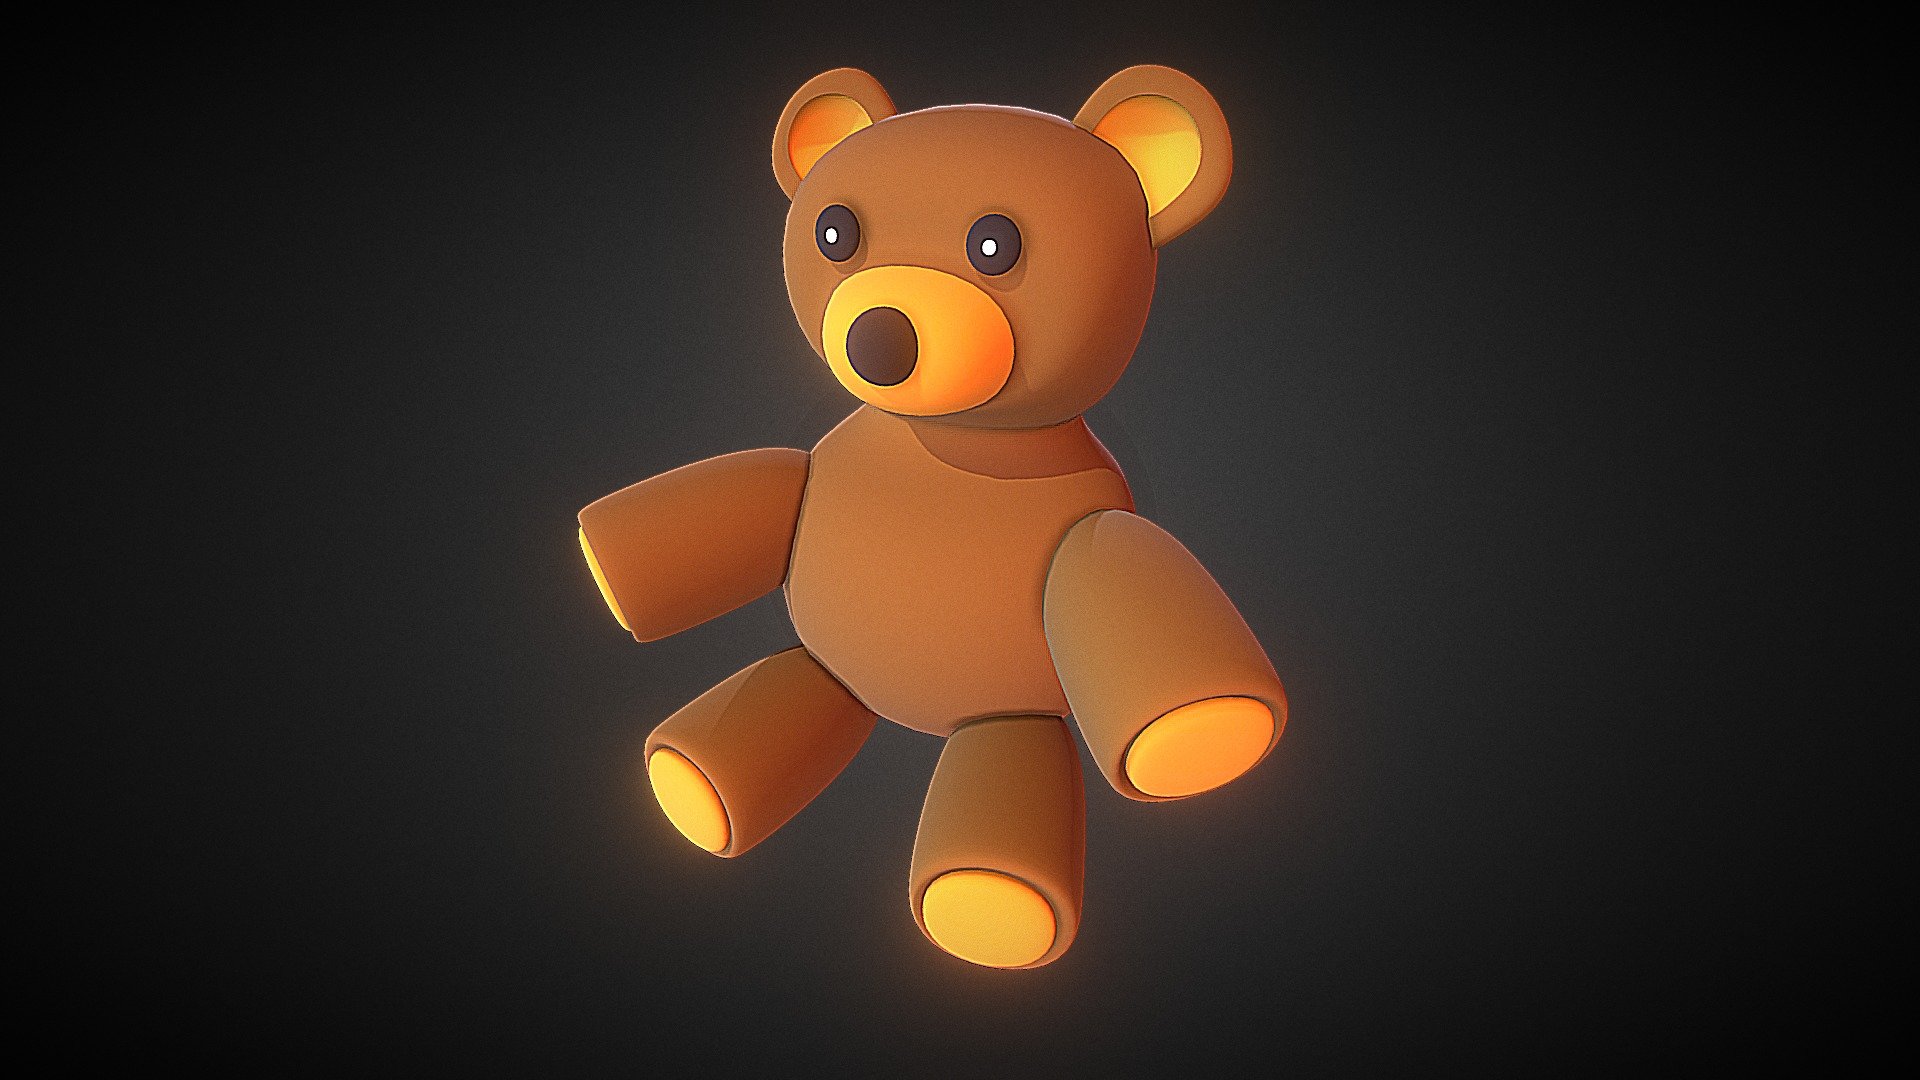 You will also get the bear with hair model with the download.

For when you feel lonely and need a hug.

This model used to have hair but the upload limit is to small for that 3d model